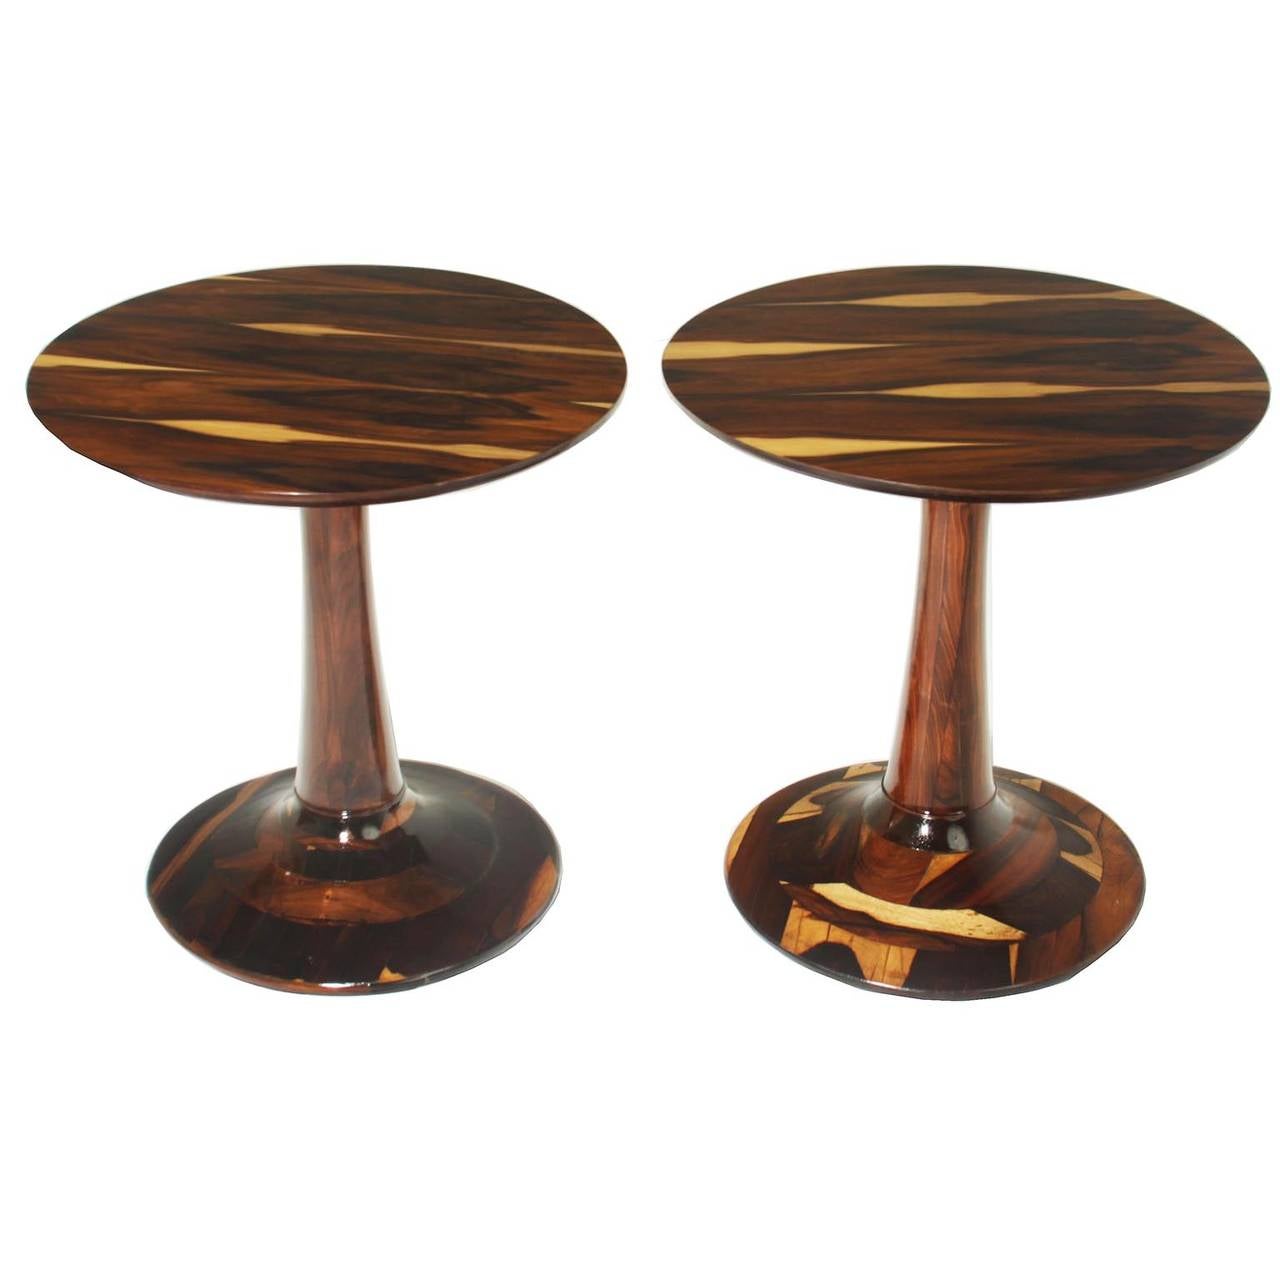 Pair of unique, solid stack laminate Brazilian Rosewood tables by Liceu de Artes Oficios. 

Many pieces are stored in our warehouse, so please click on CONTACT DEALER under our logo below to find out if the pieces you are interested in seeing are